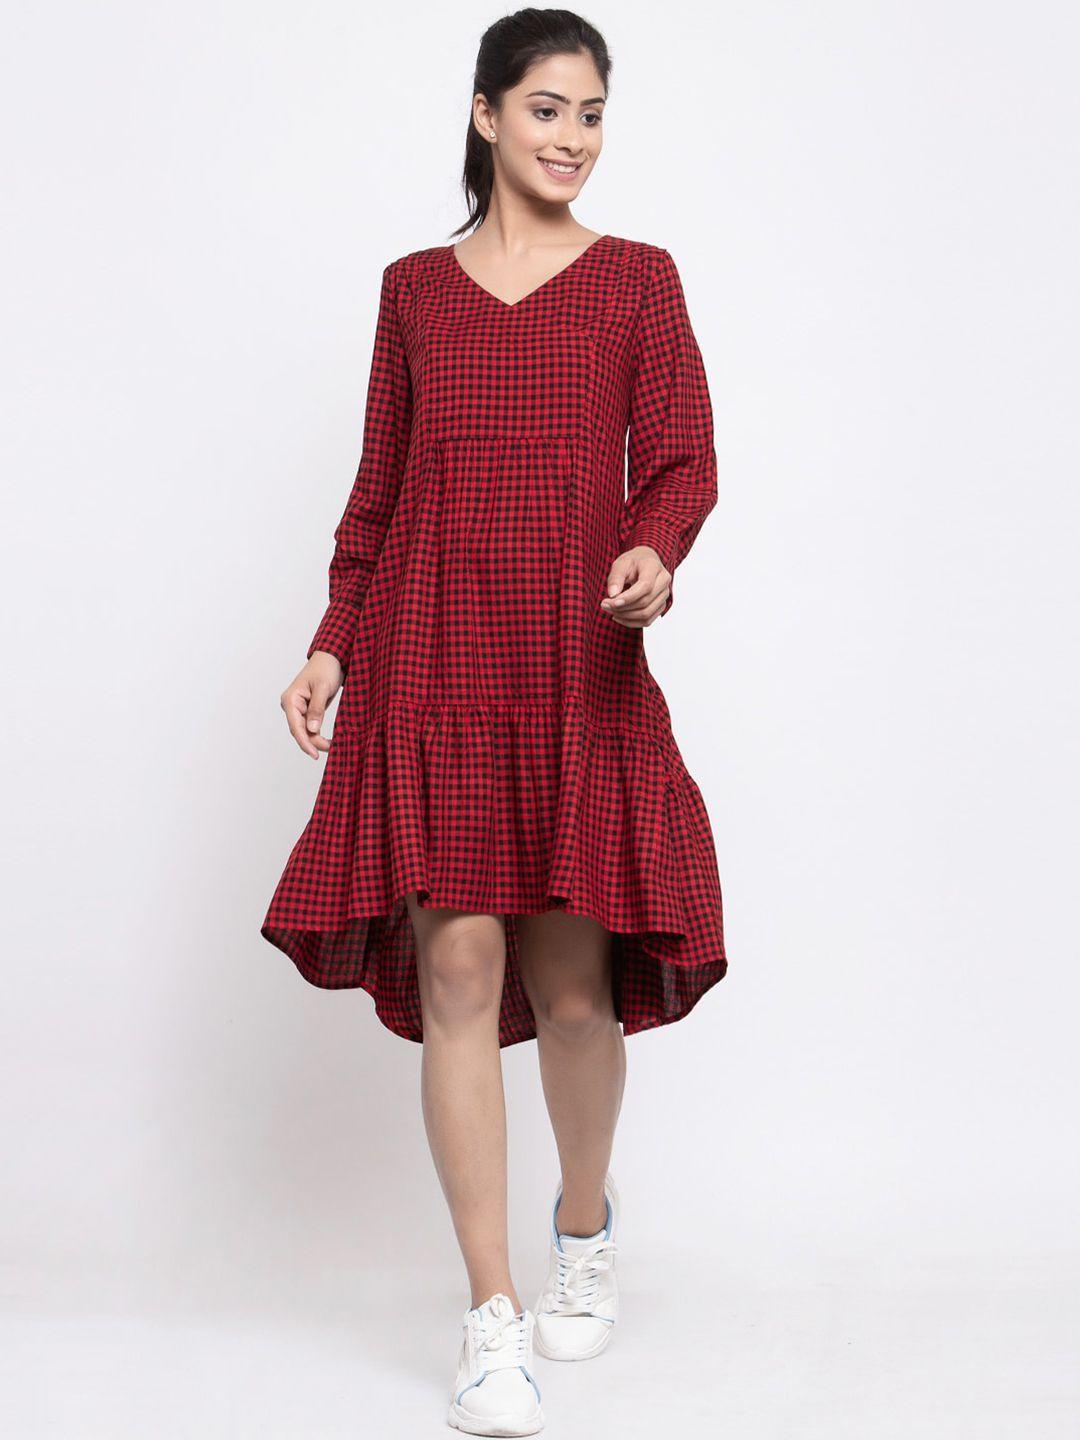 TERQUOIS Women Red Printed Oversized Drop-Waist Dress